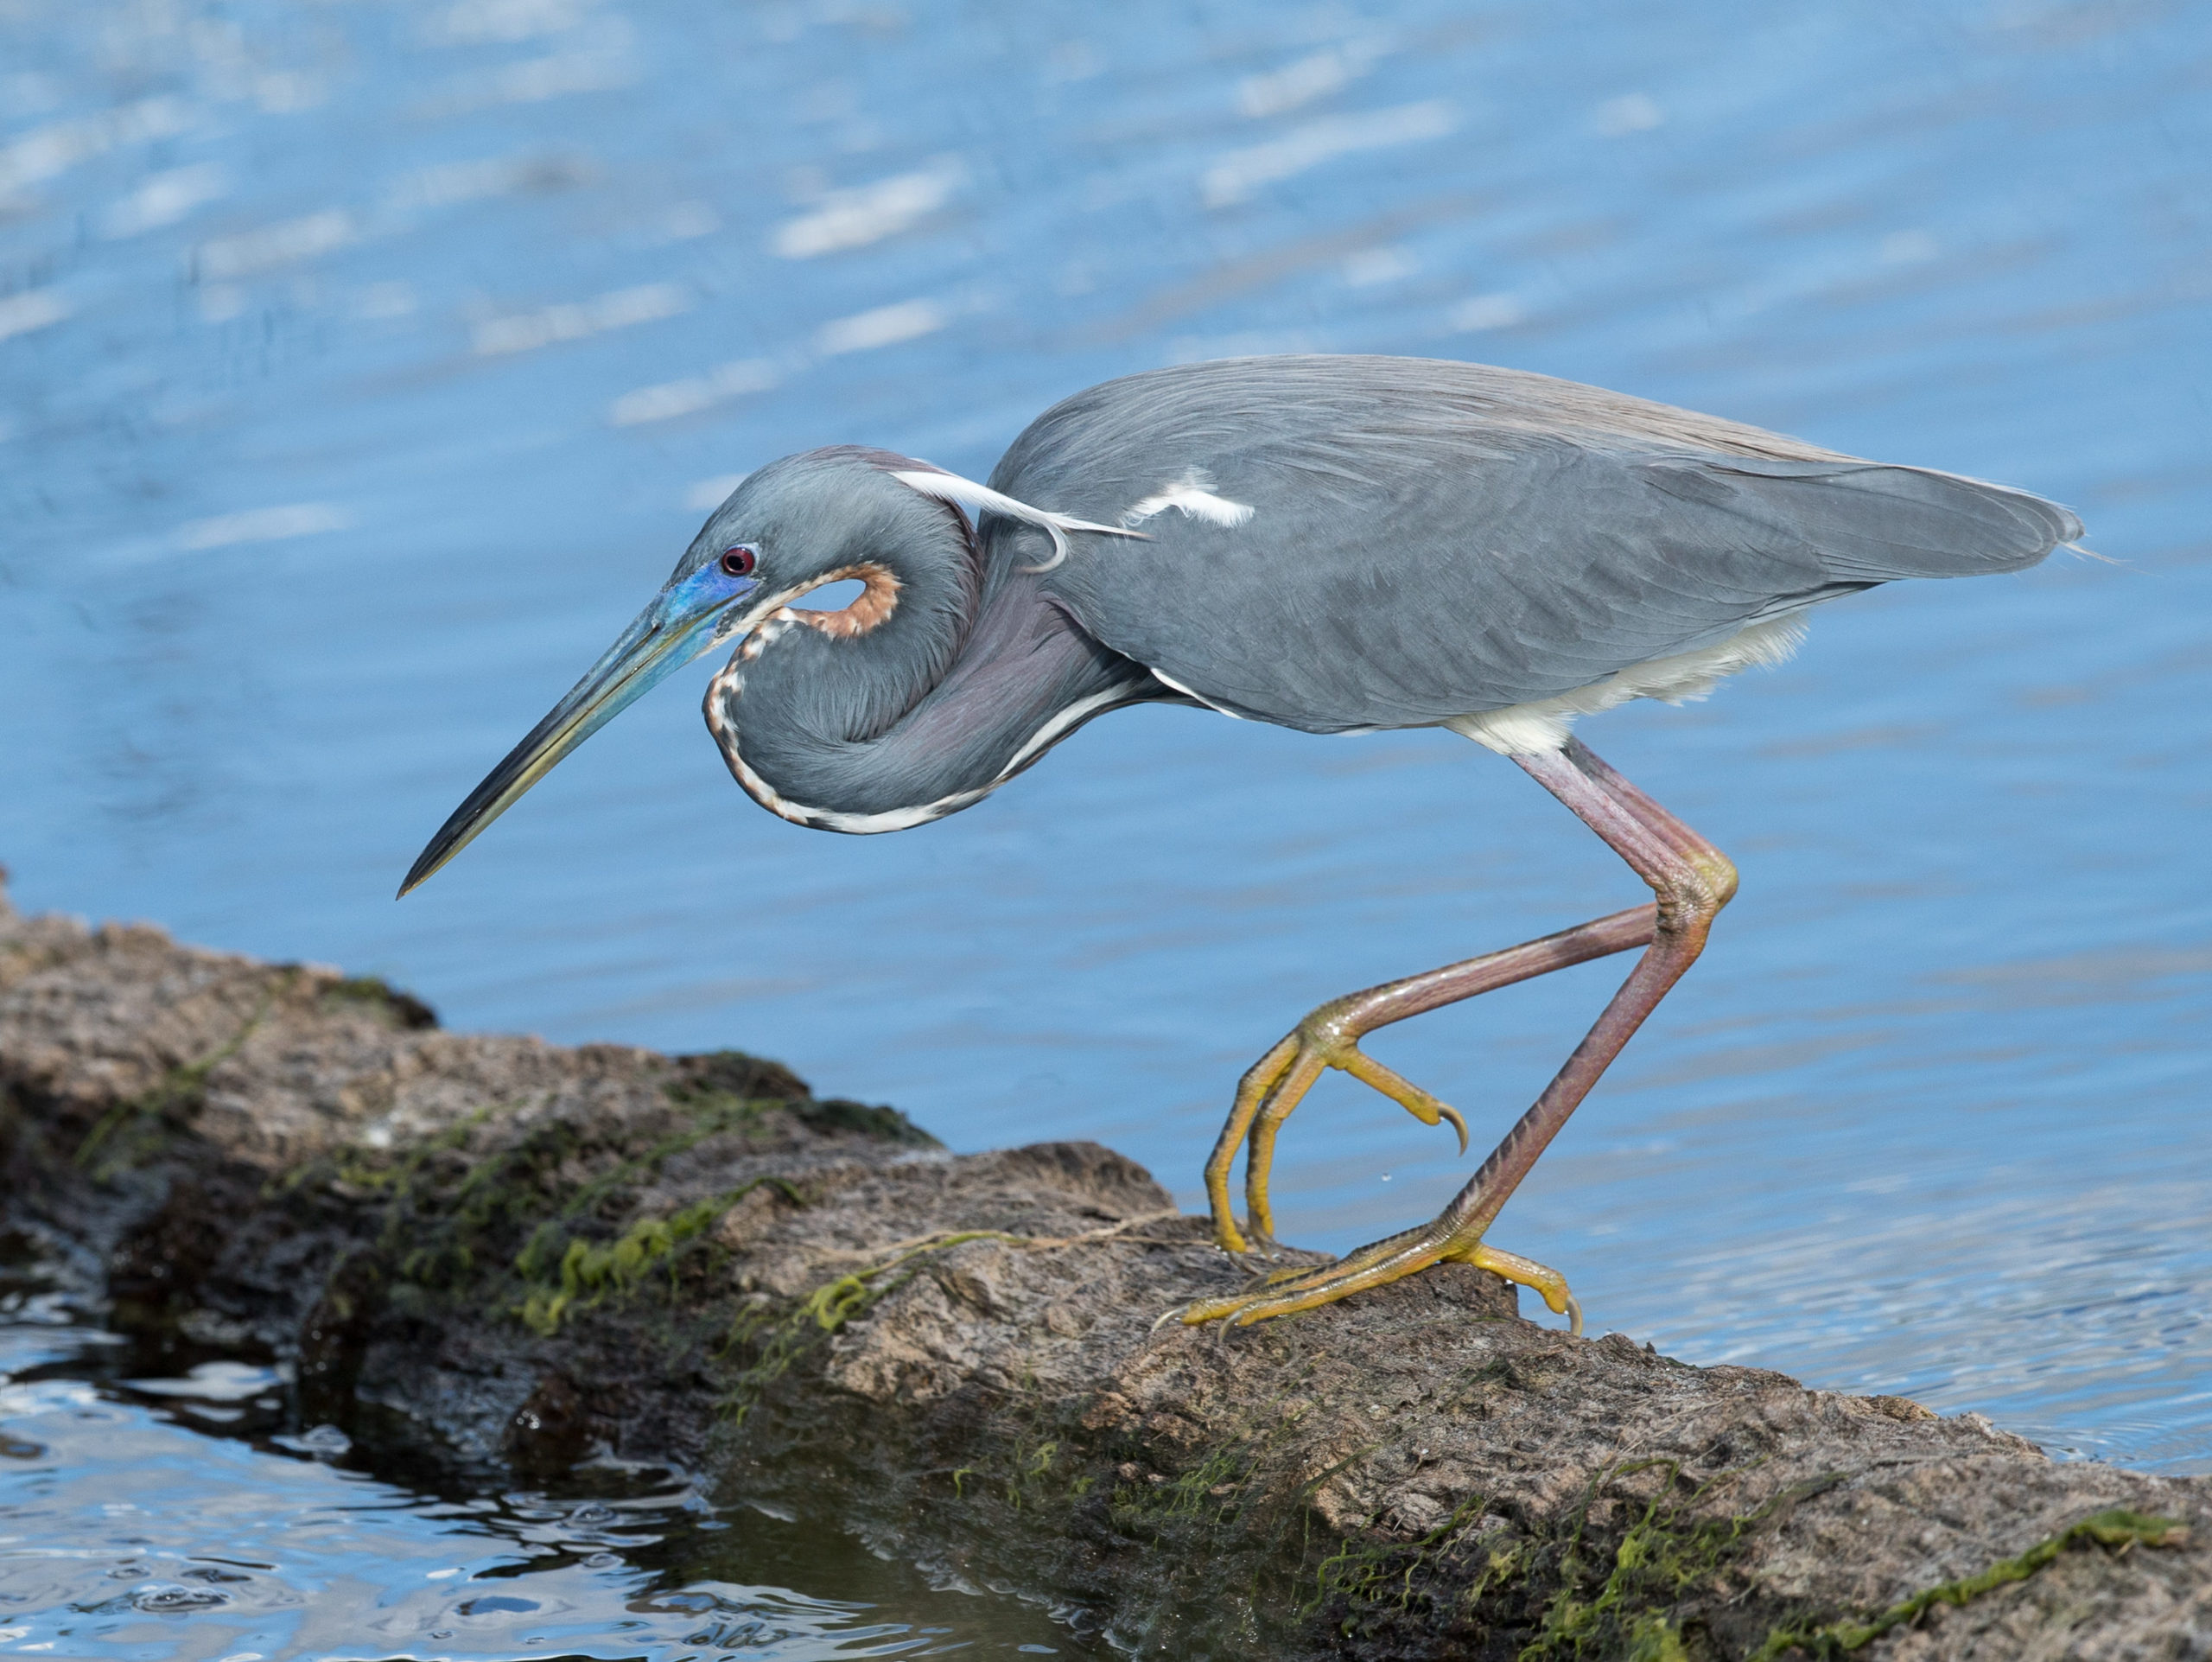 Tricolored Heron hunting for prey from a tree log.